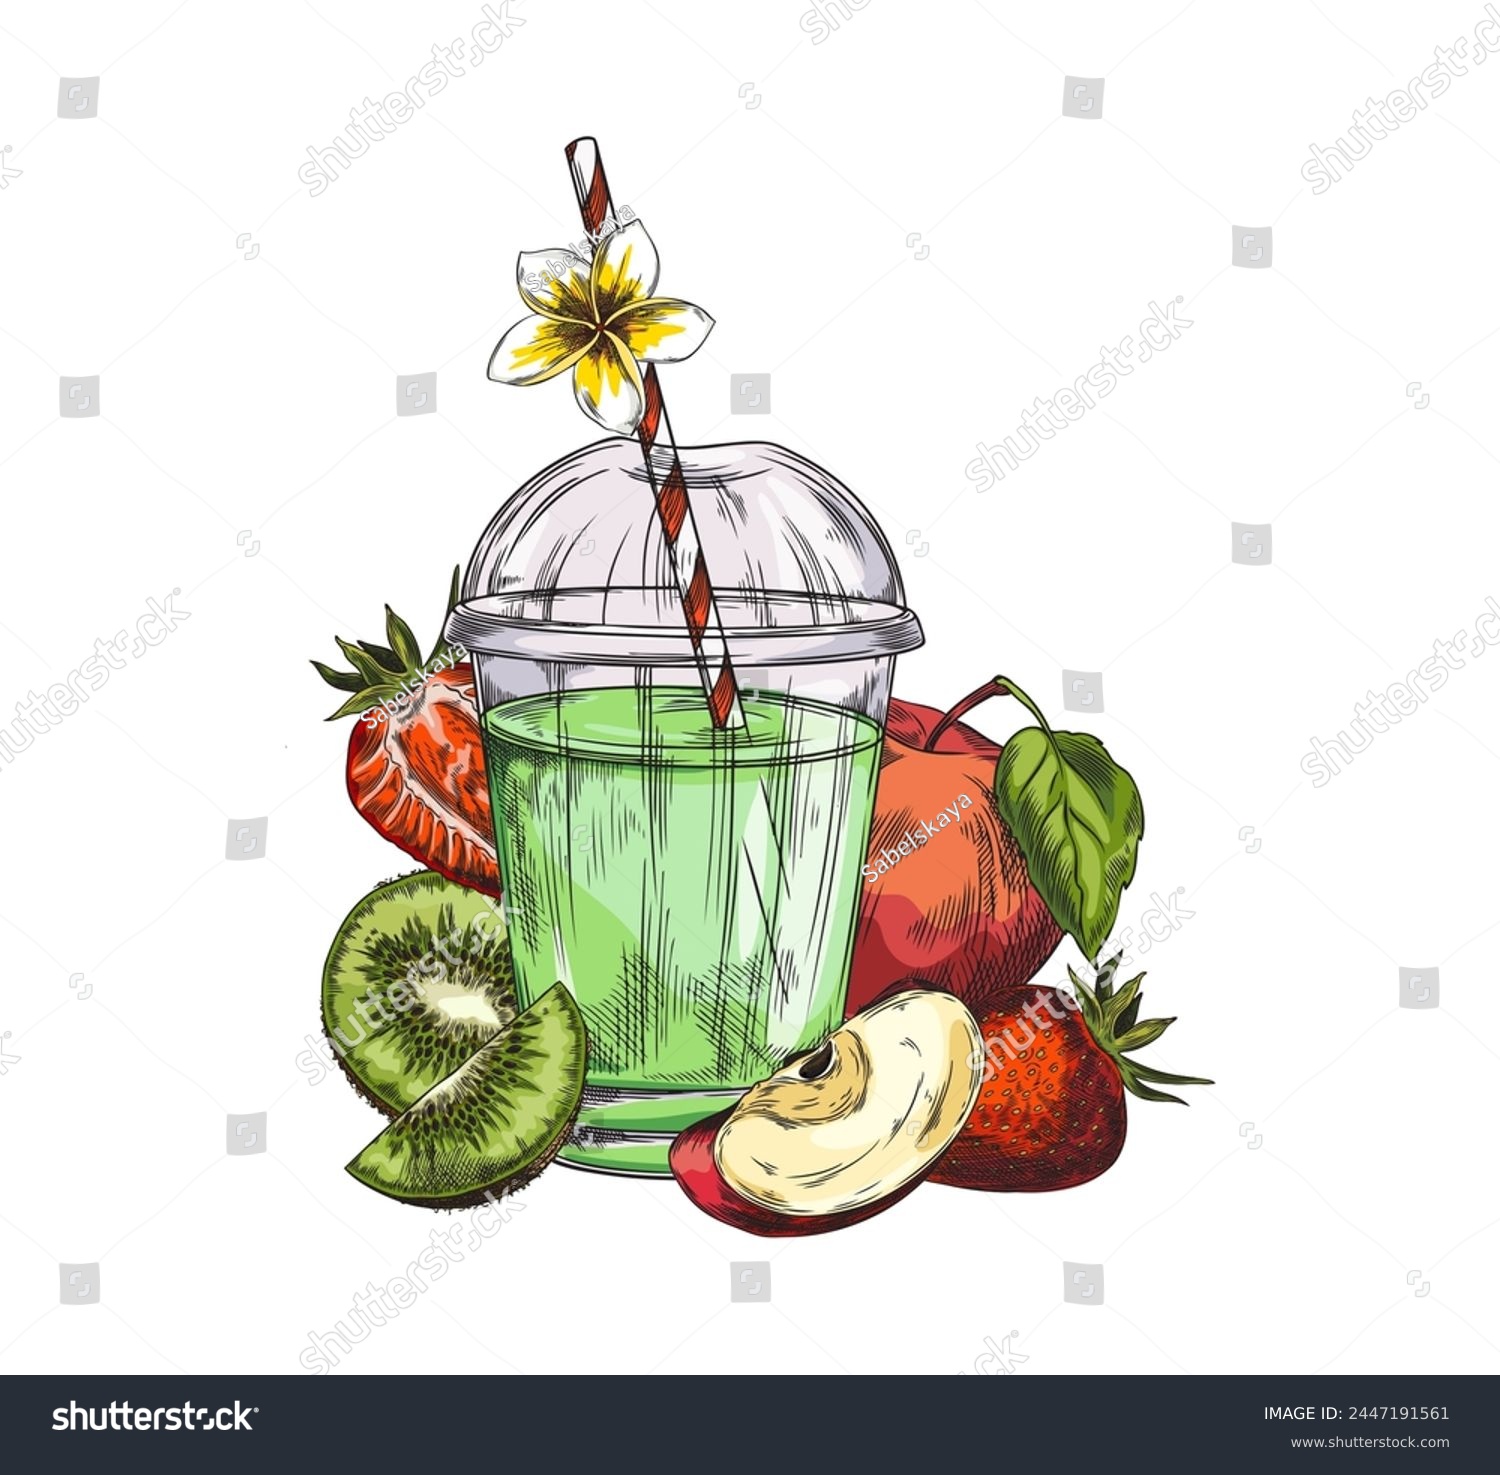 SVG of Green smoothie in a transparent plastic cup with a cocktail stick on a background of kiwi, apple and strawberry. Fruit soft drinks and soft drinks in glasses. Ideal for advertising fresh drinks. svg